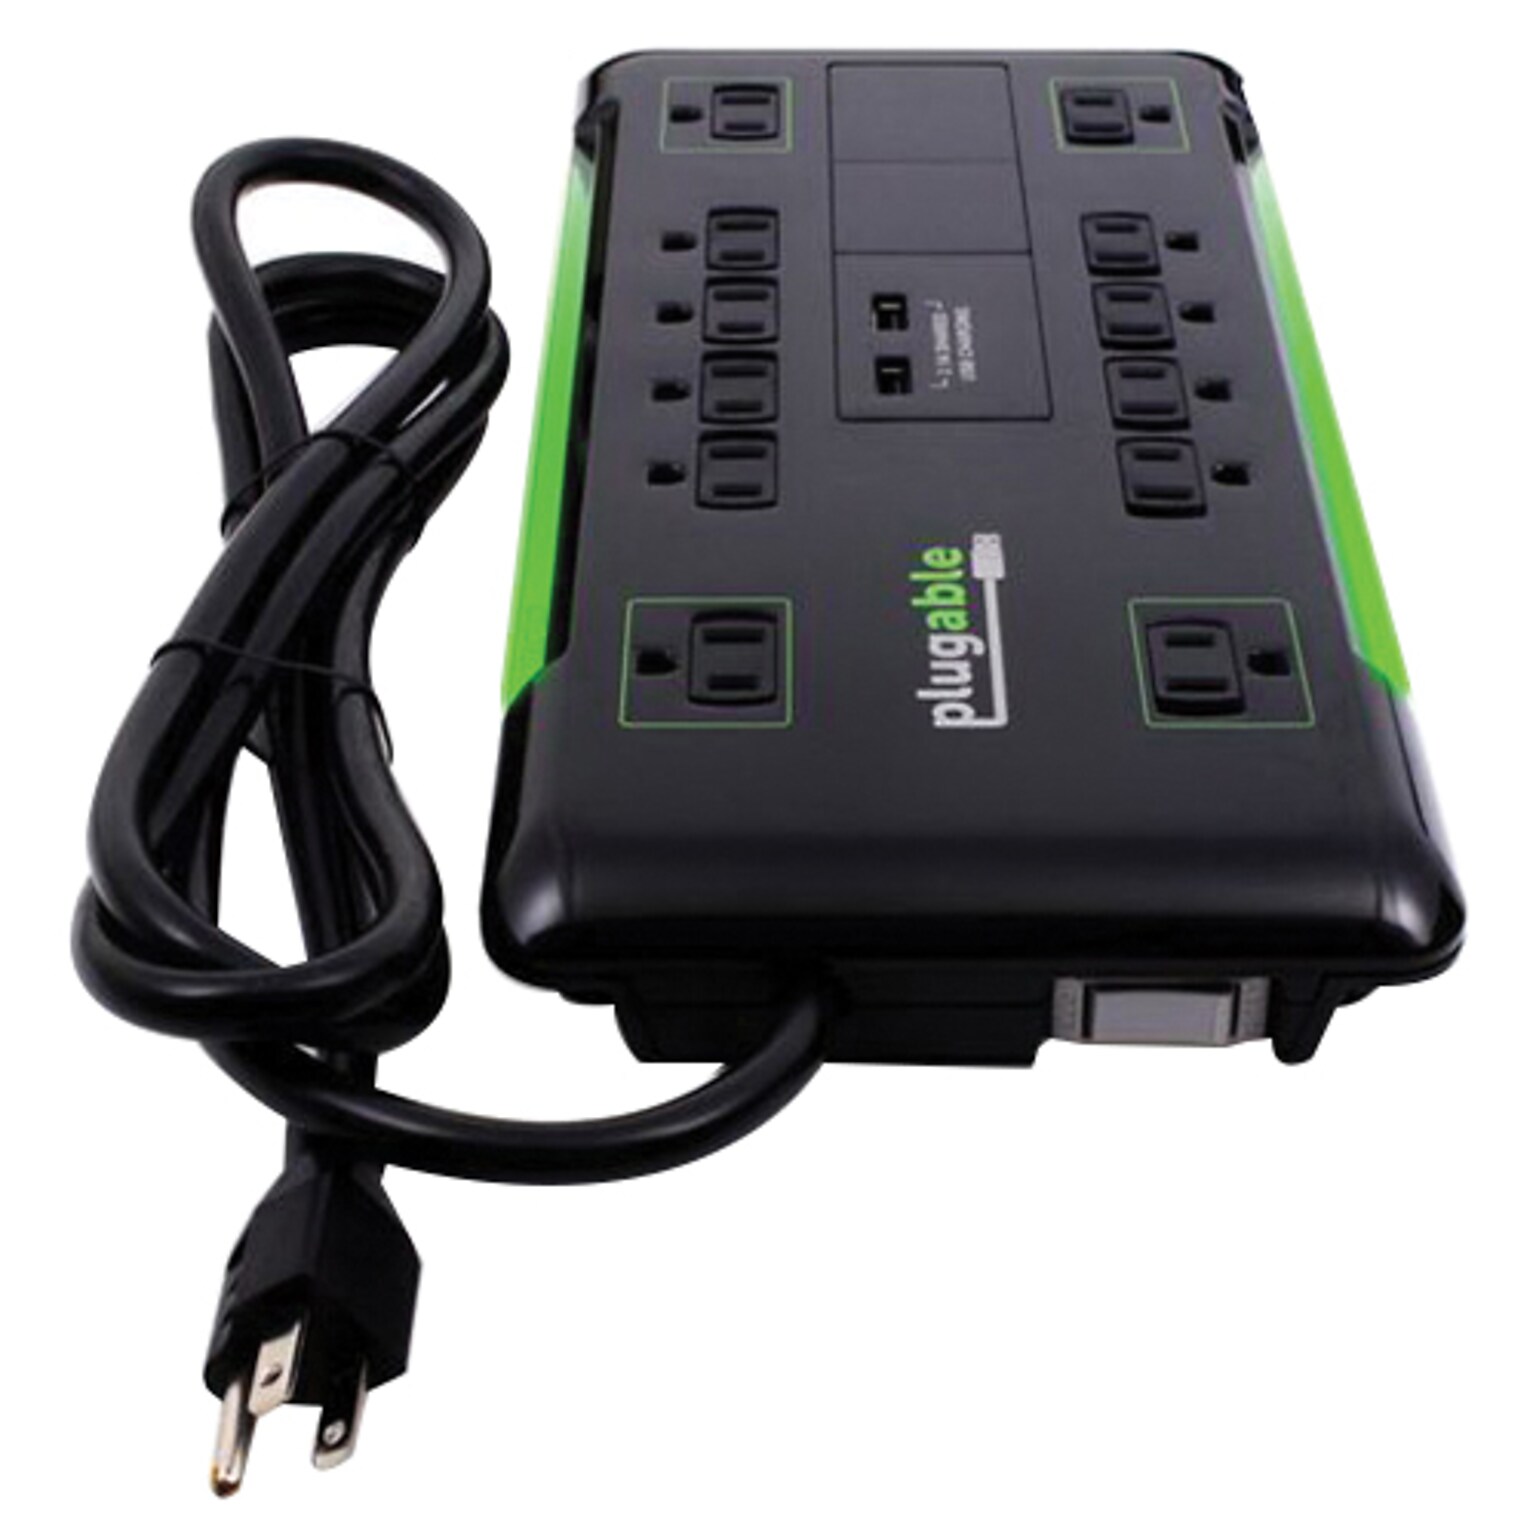 Plugable 25 12-Outlet Power Strip with 2-Port USB Charger, Black (PS12-USB25)